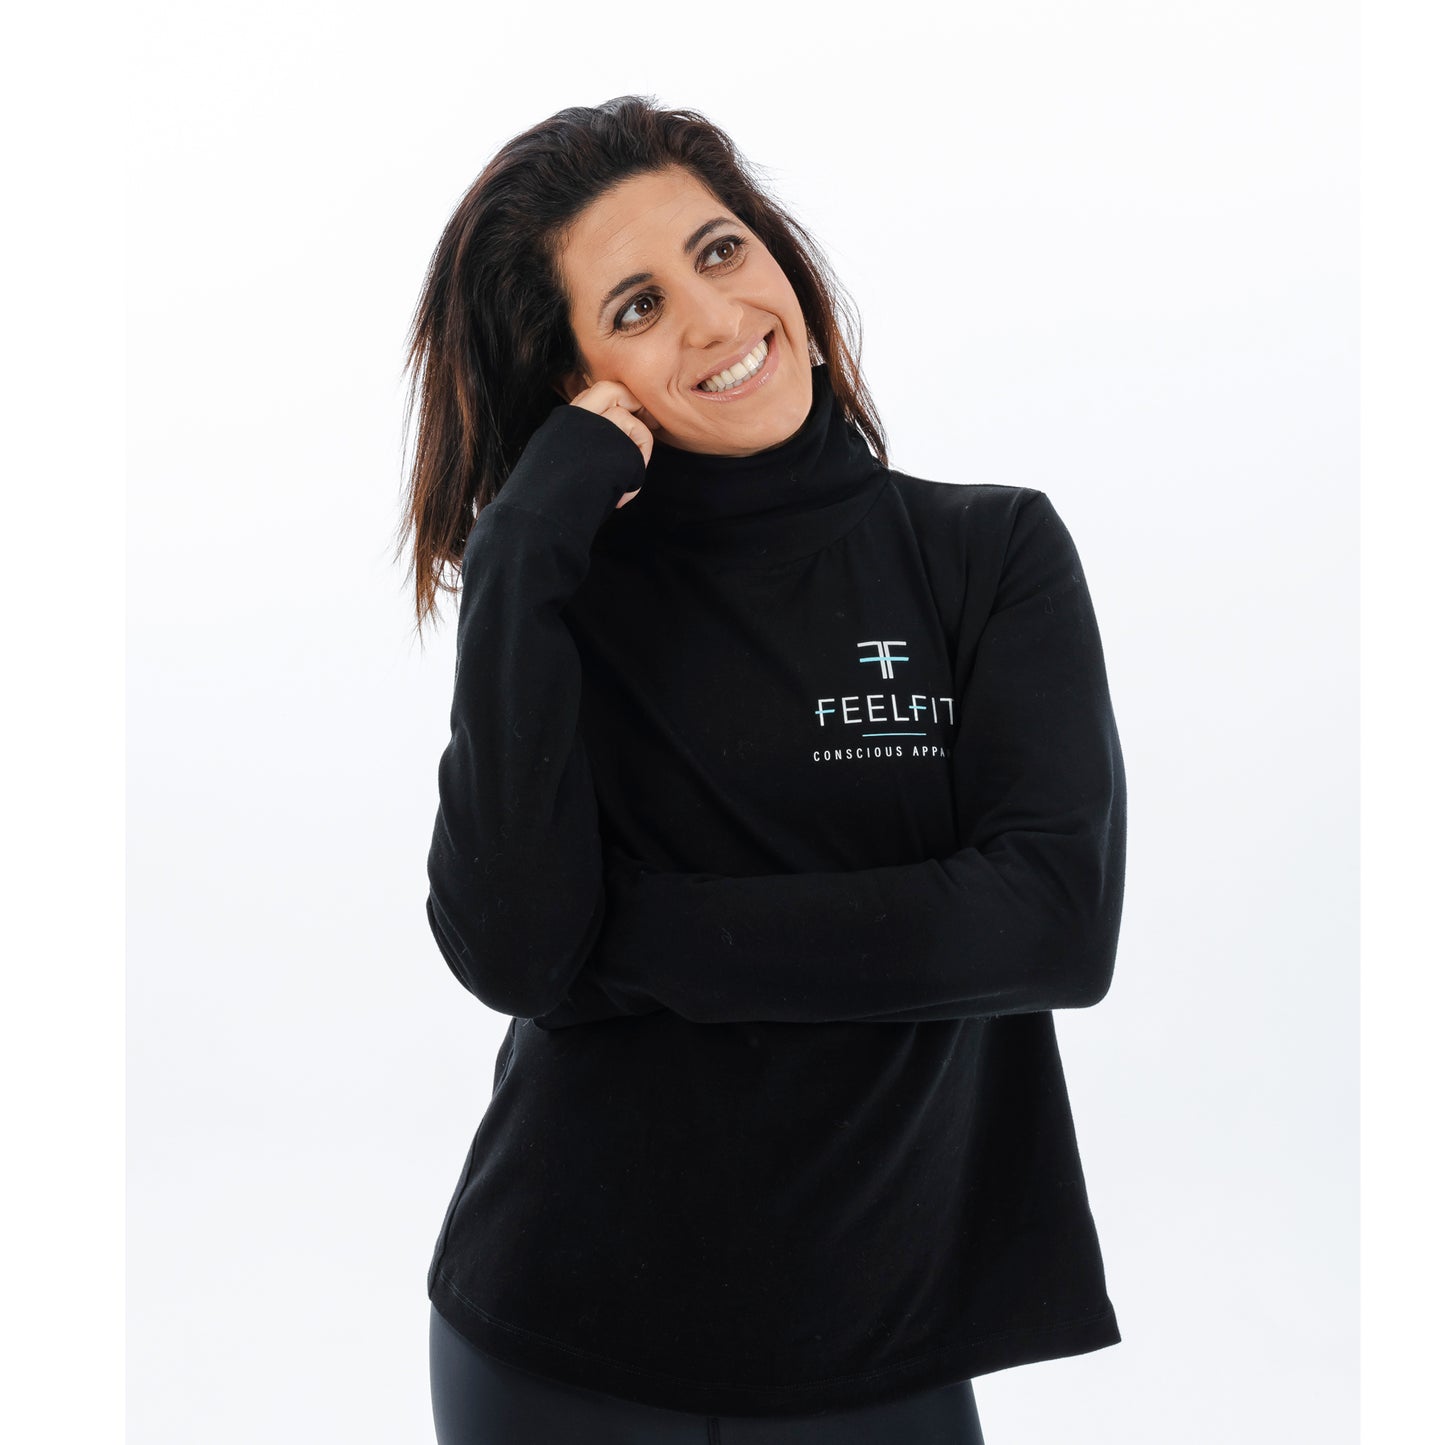 Escape Workout Sweatshirt Long Sleeve with Zip Up Back 